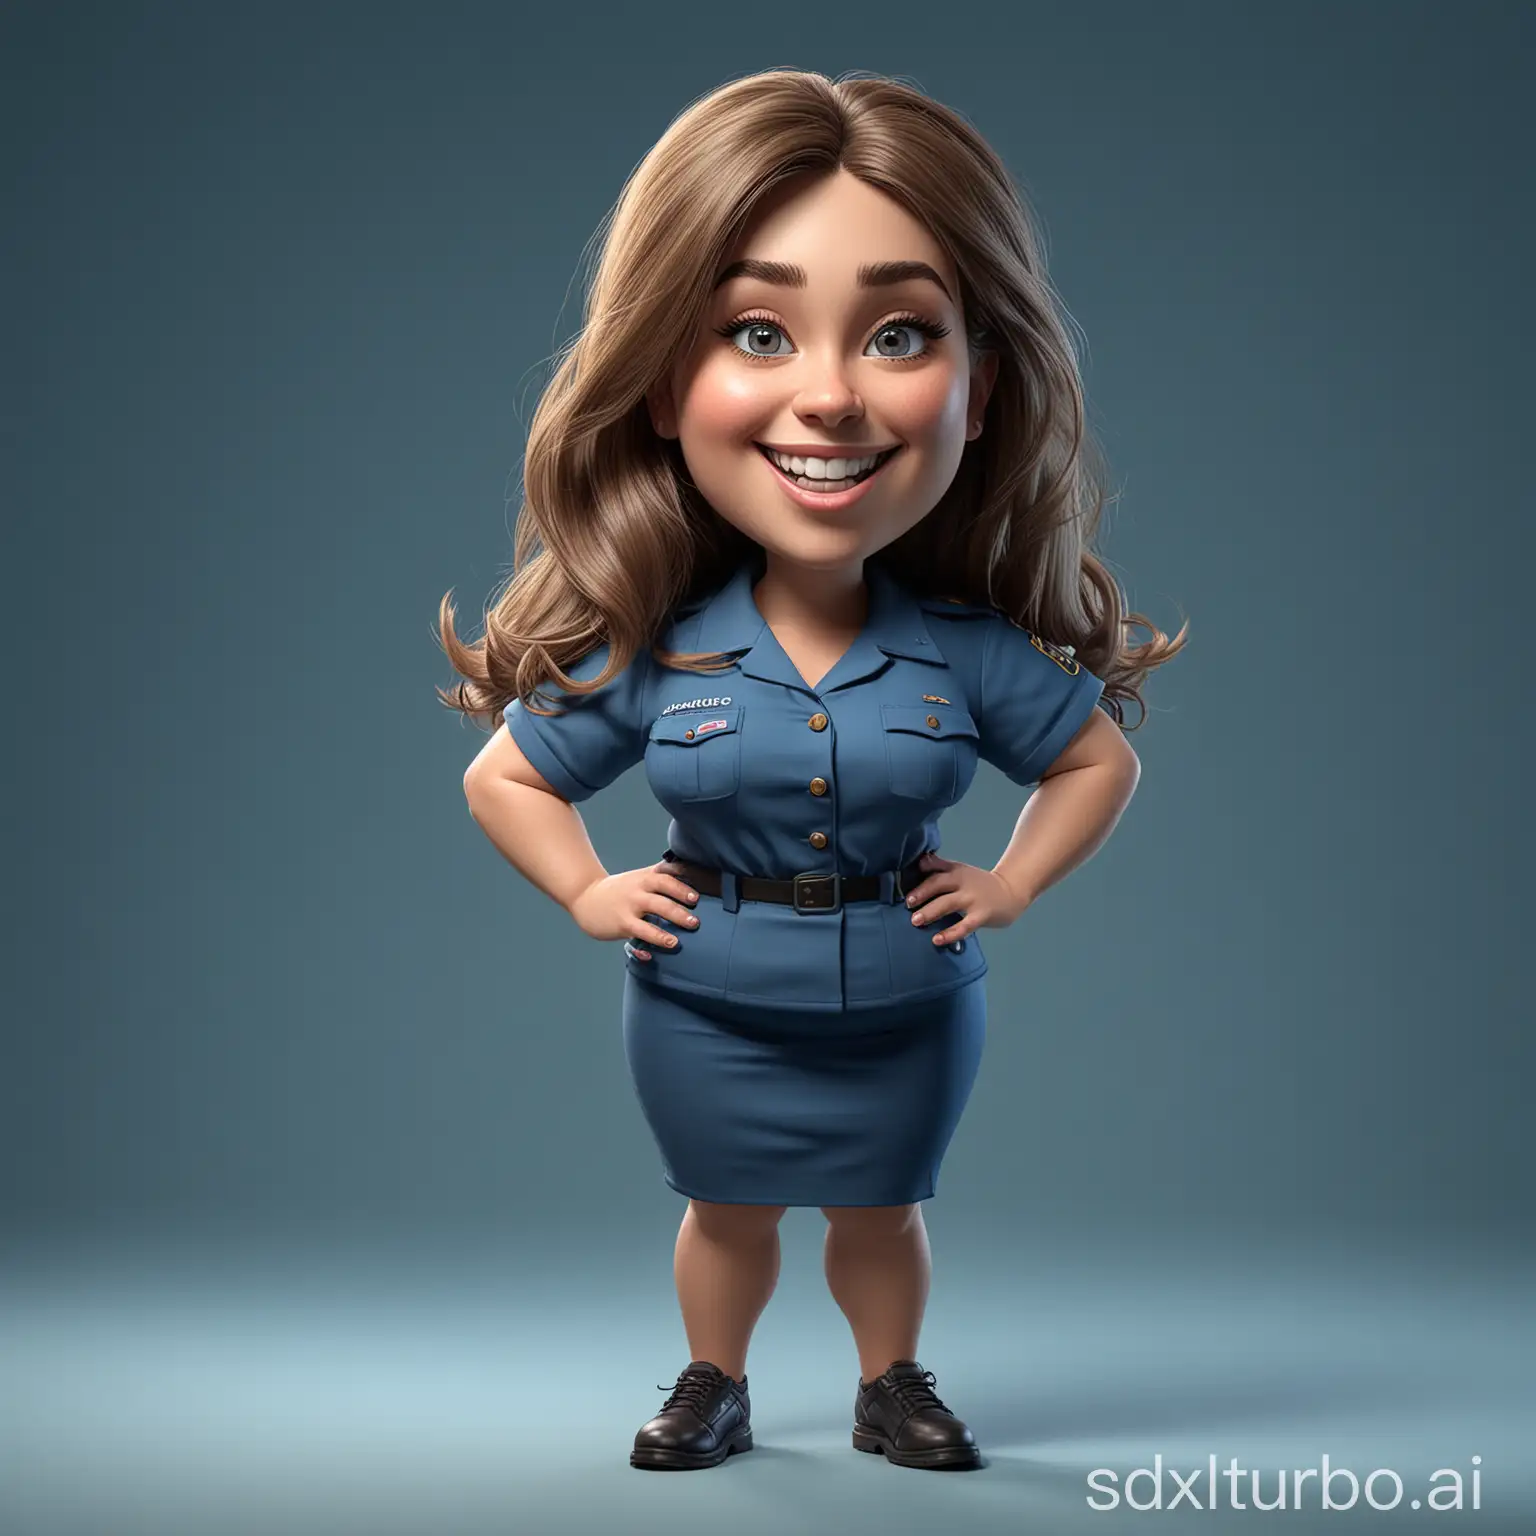 Hyperrealistic-3D-Cartoon-Caricature-of-a-Smiling-23YearOld-Woman-in-Blue-Uniform